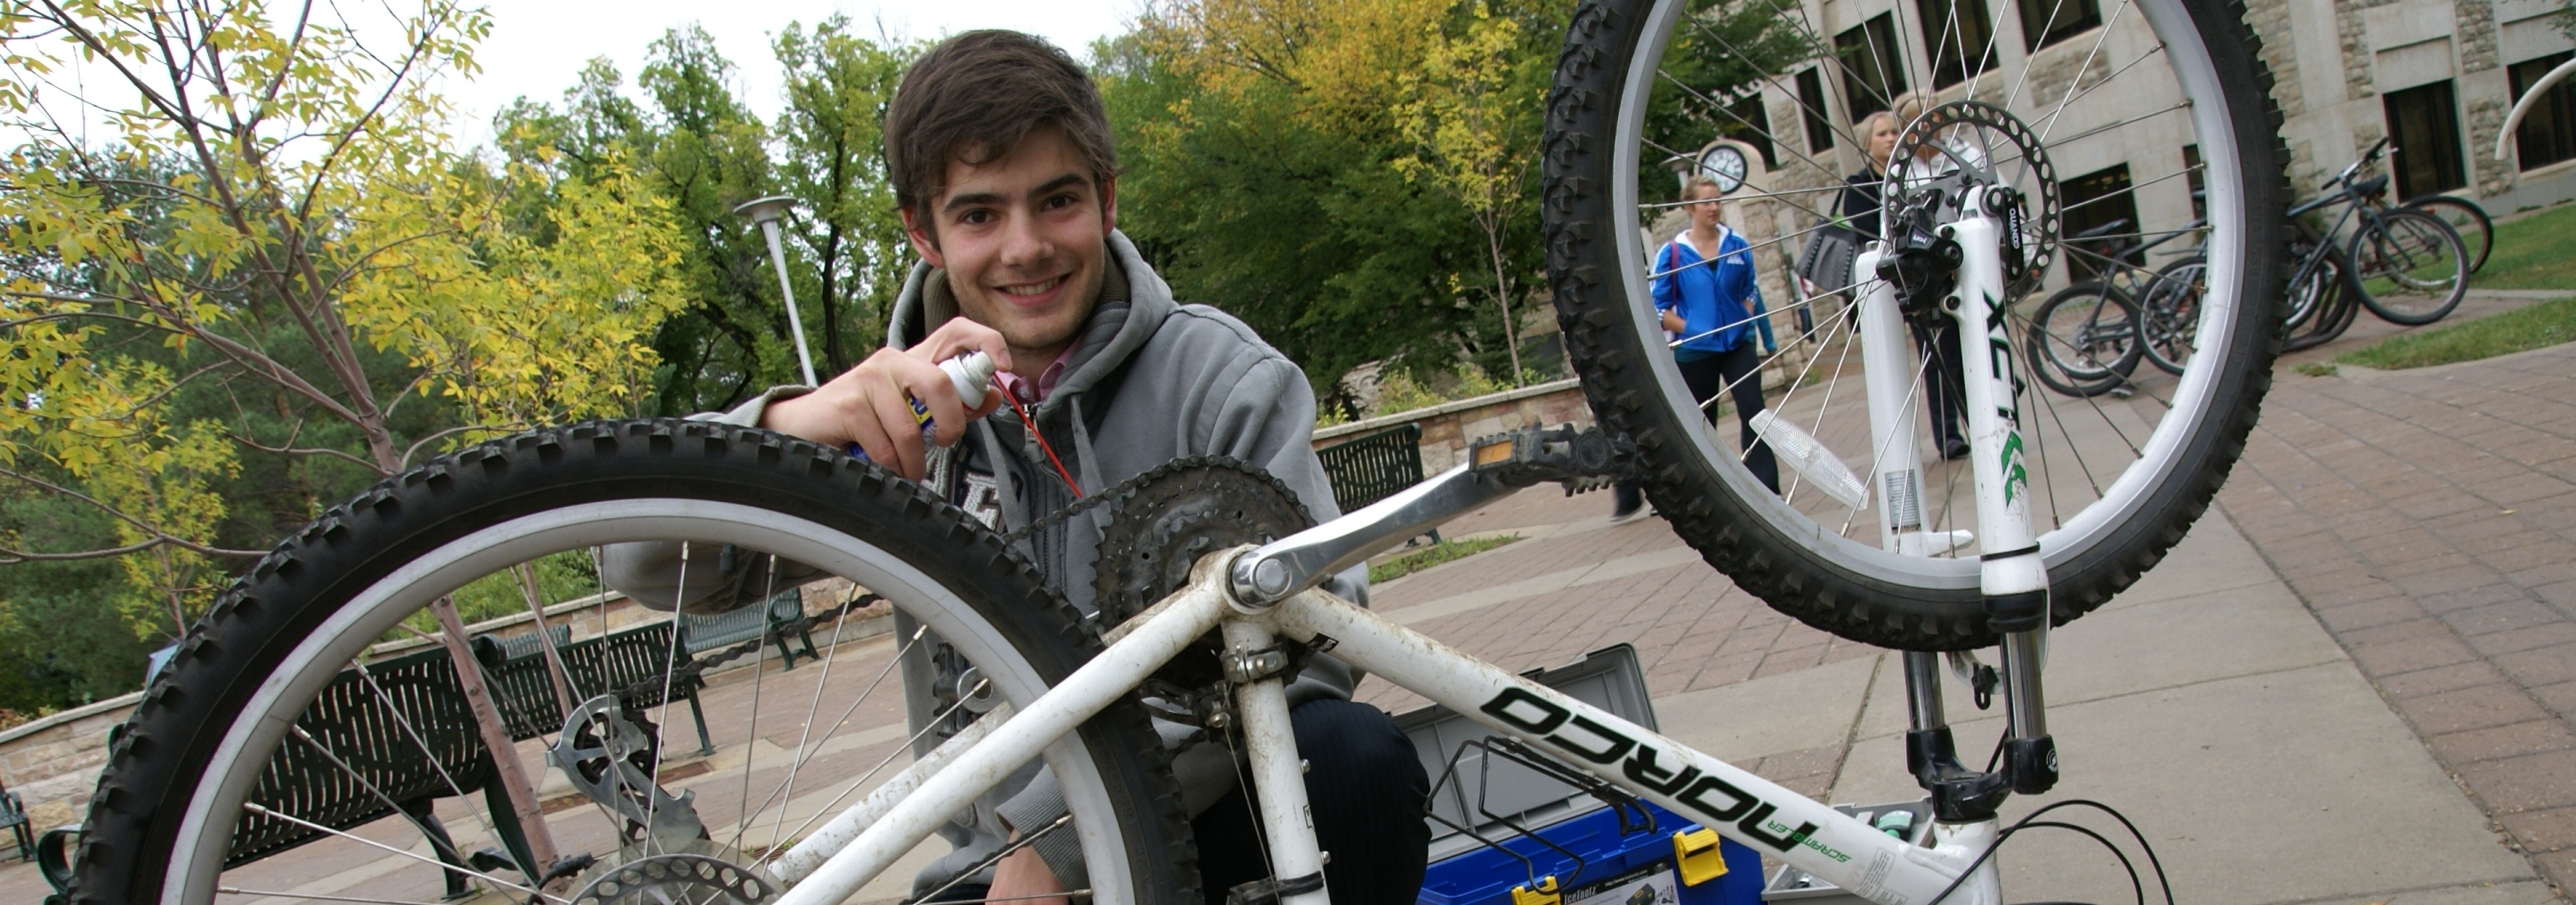 A student conducting a bike tune-up on campus